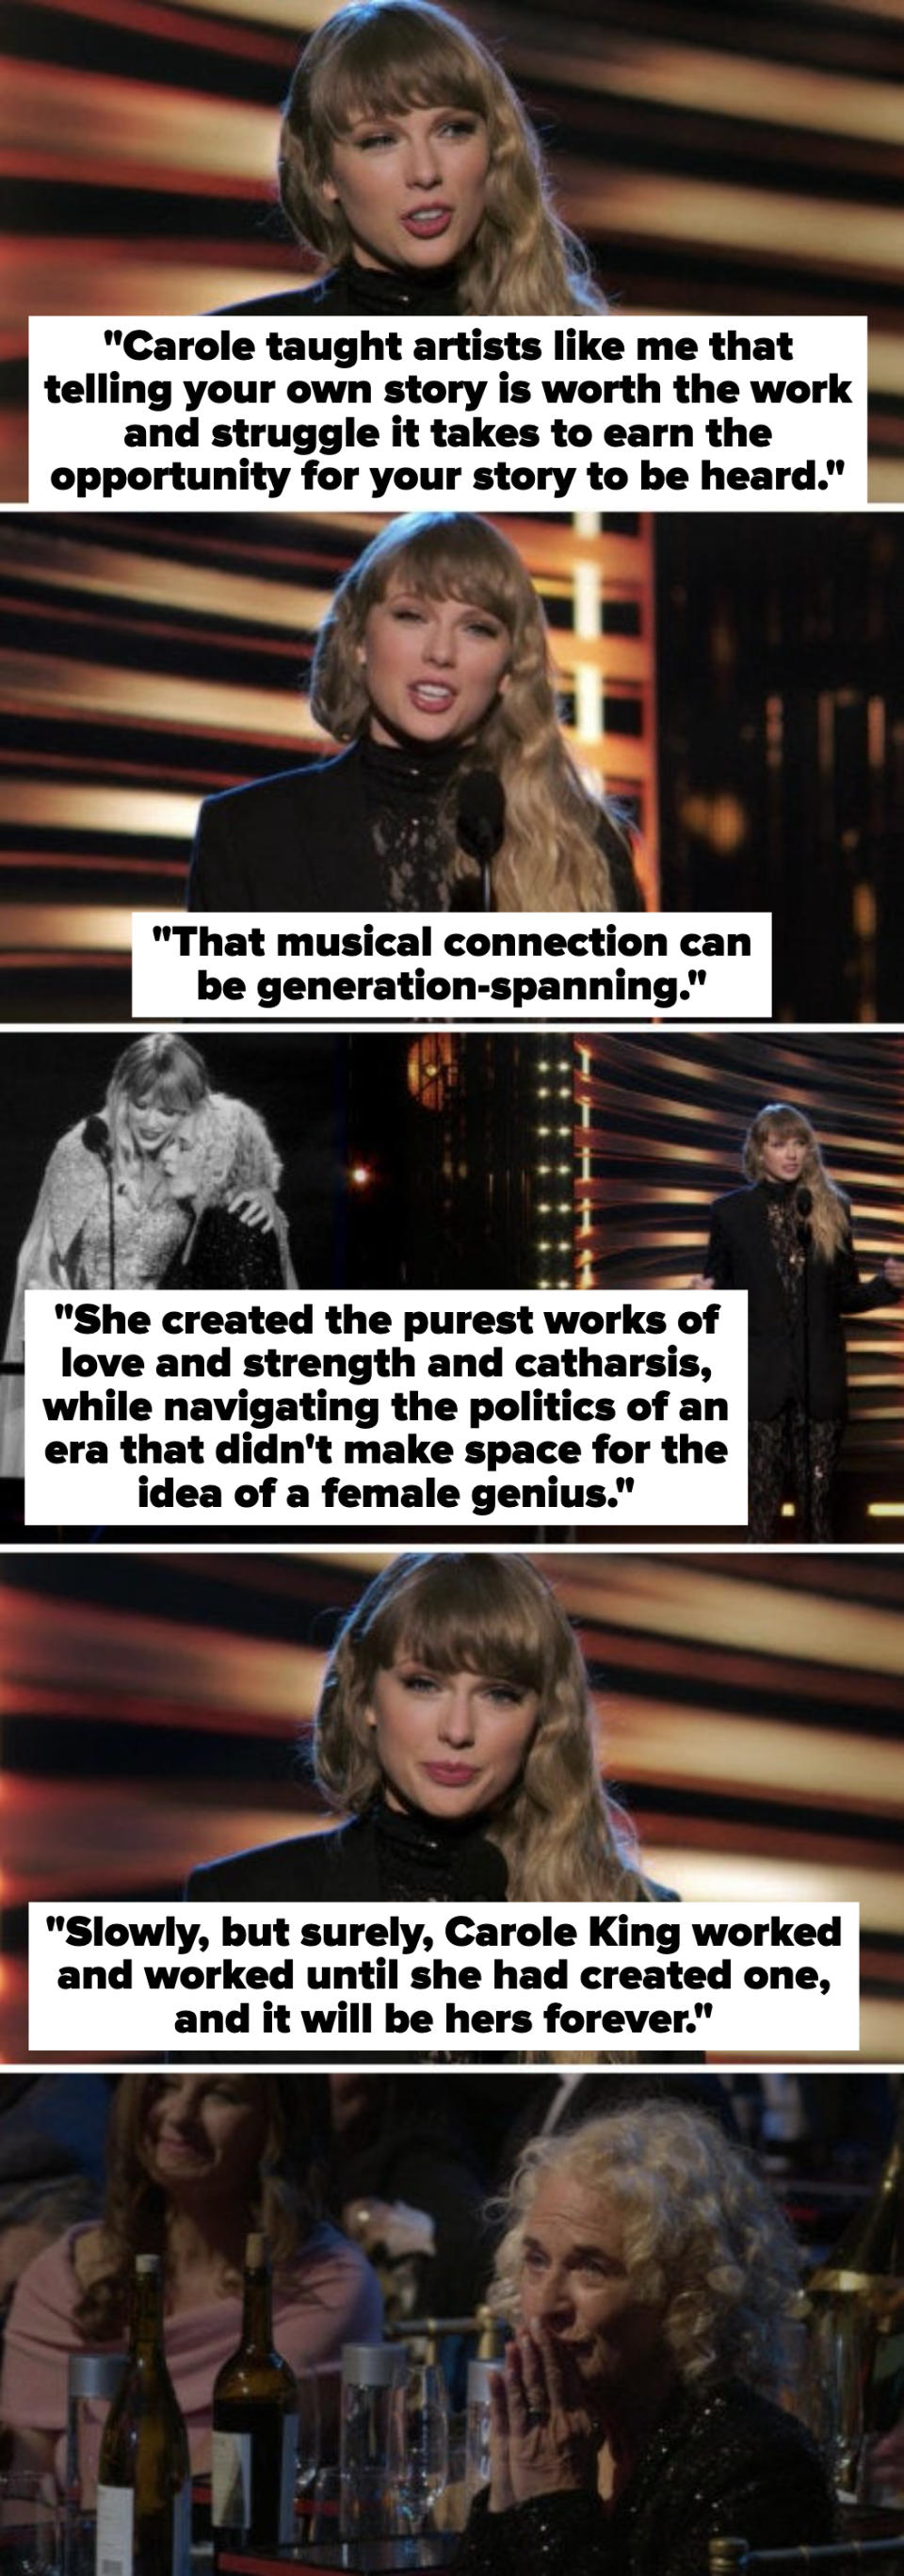 Taylor Swift on Carole King: "She created the purest works of love and strength and catharsis, while navigating the politics of an era that didn't make space for the idea of a female genius"